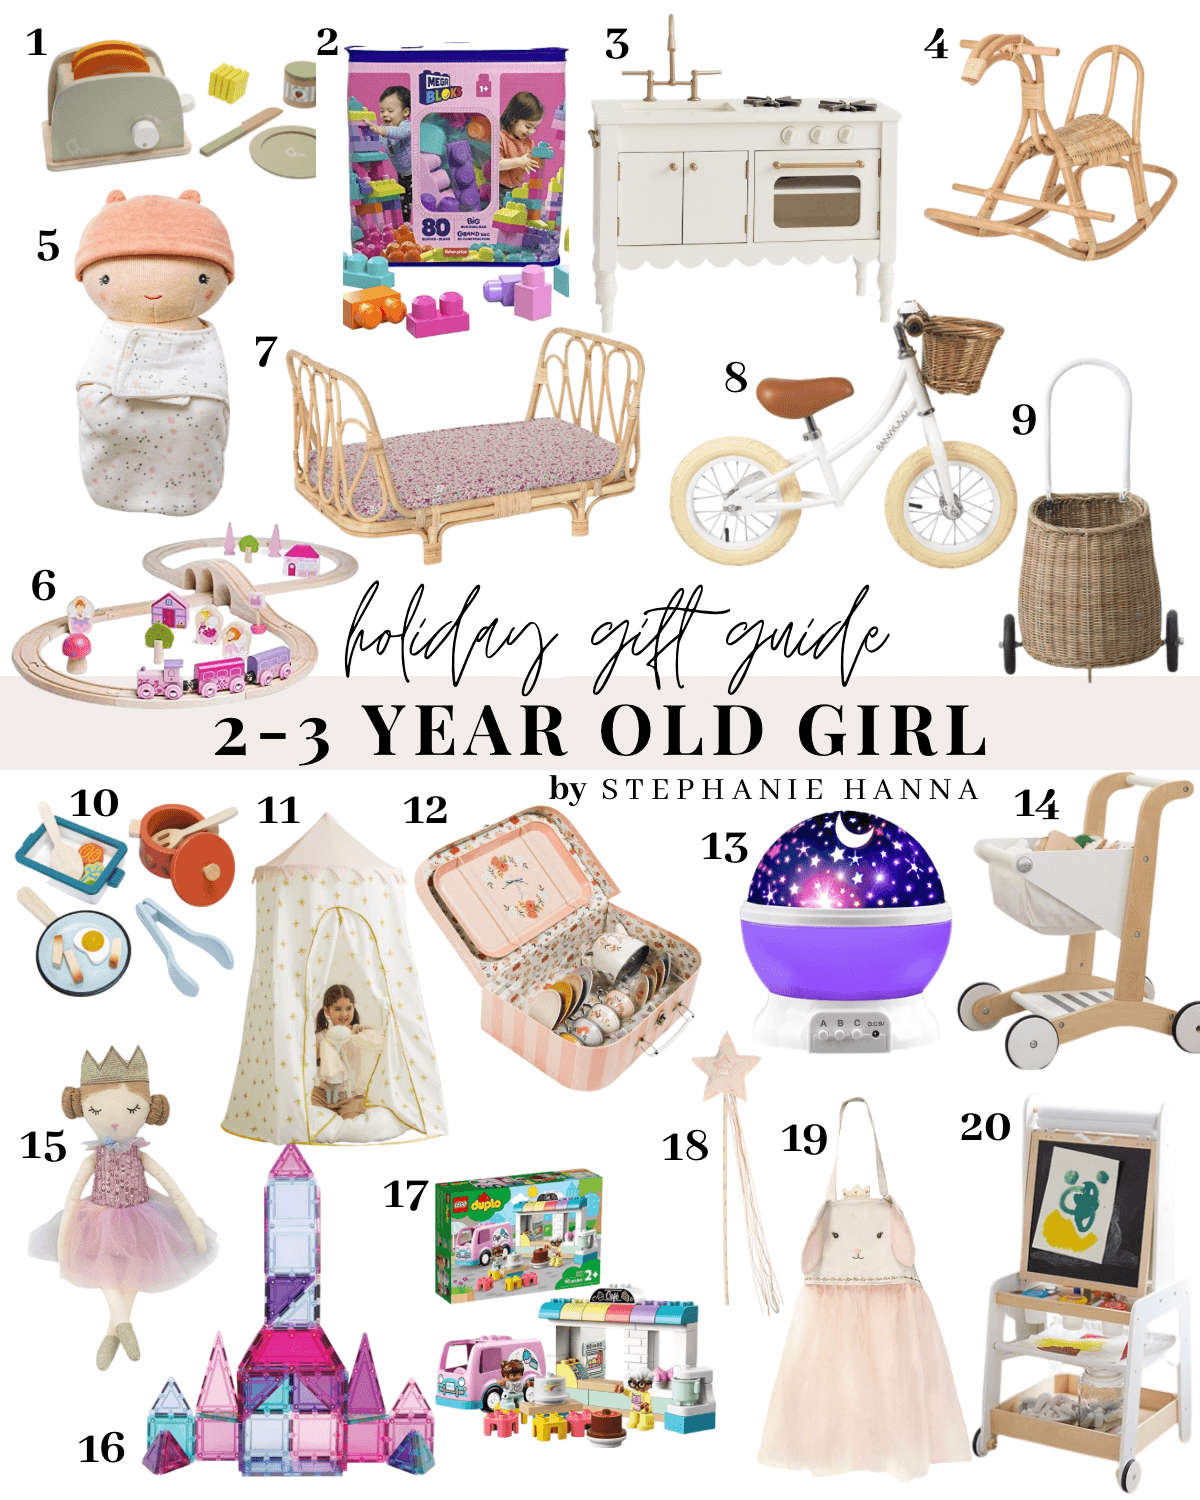 Gift Guide for 8-10 year old Girl - Stephanie Hanna Blog